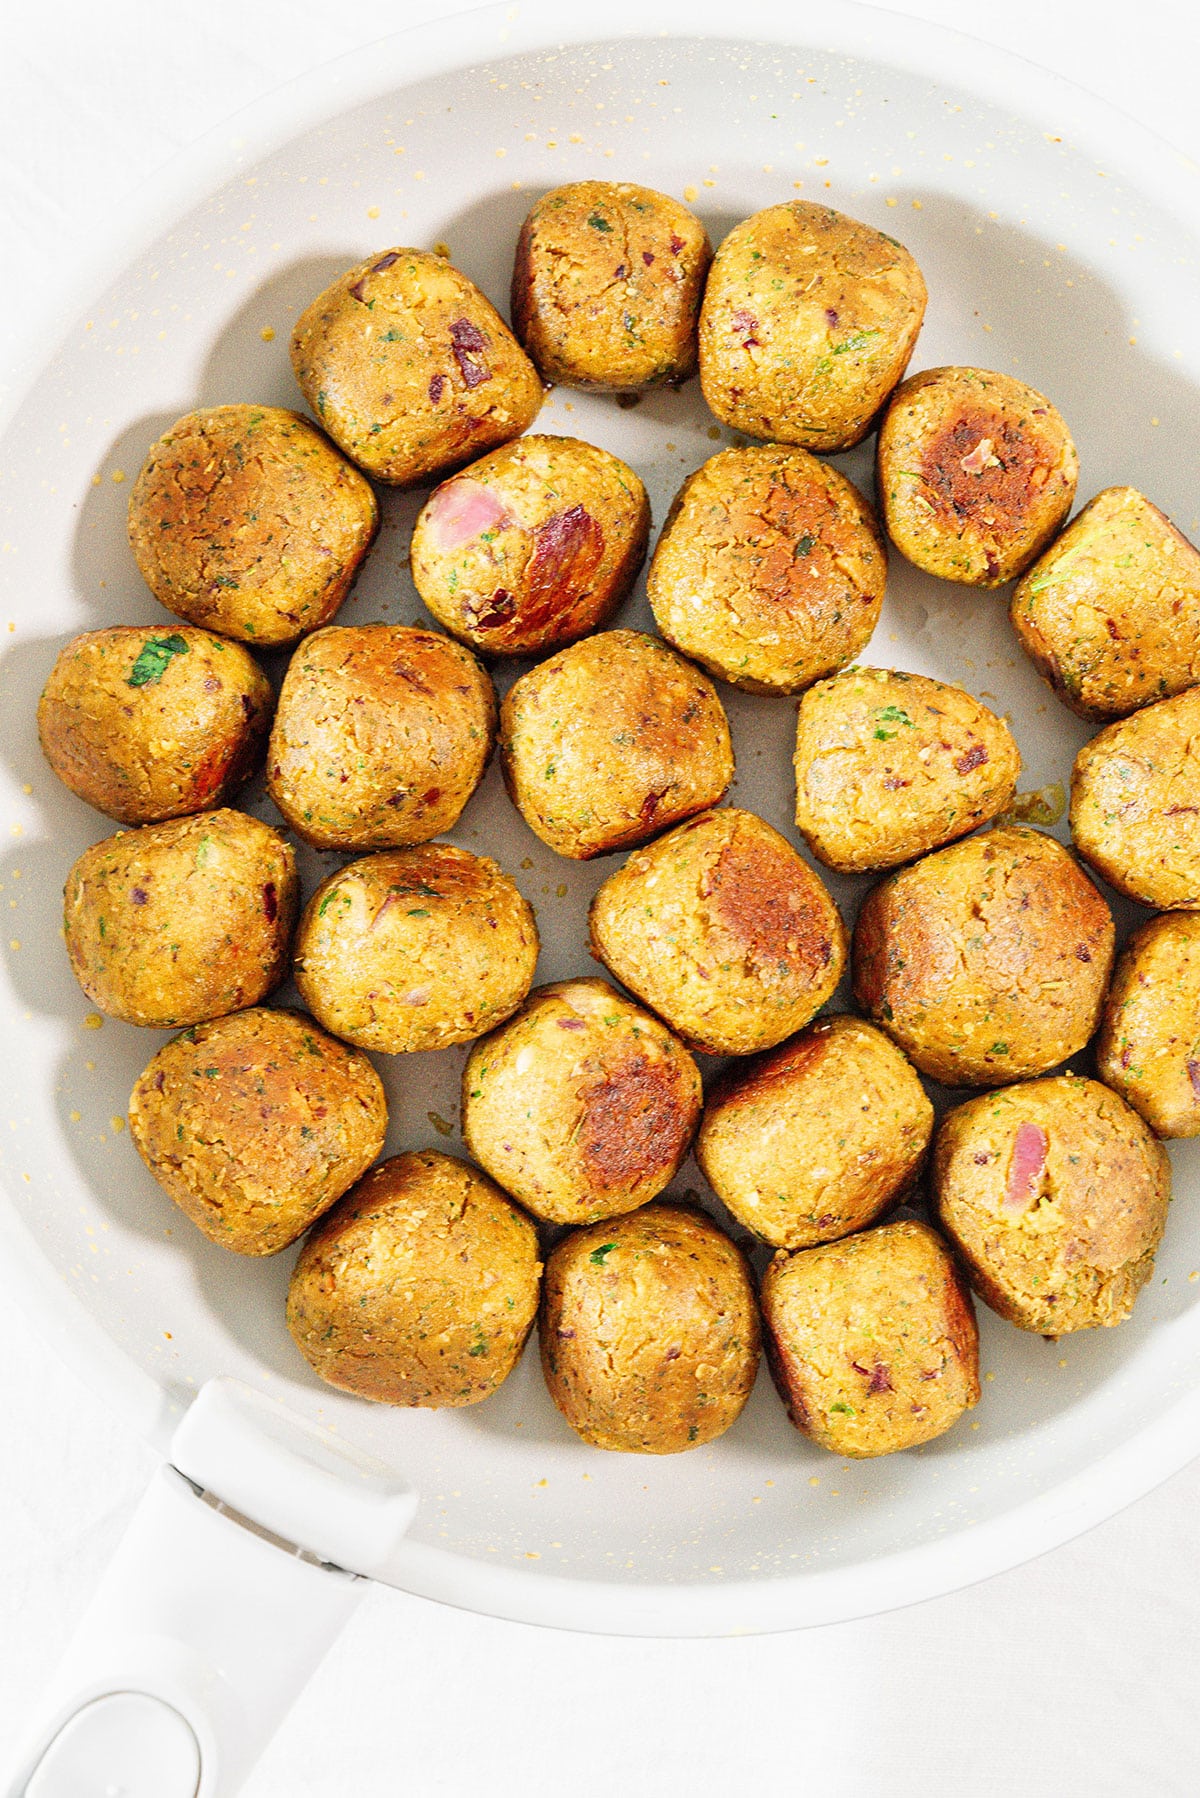 Chickpea meatballs in a pan.